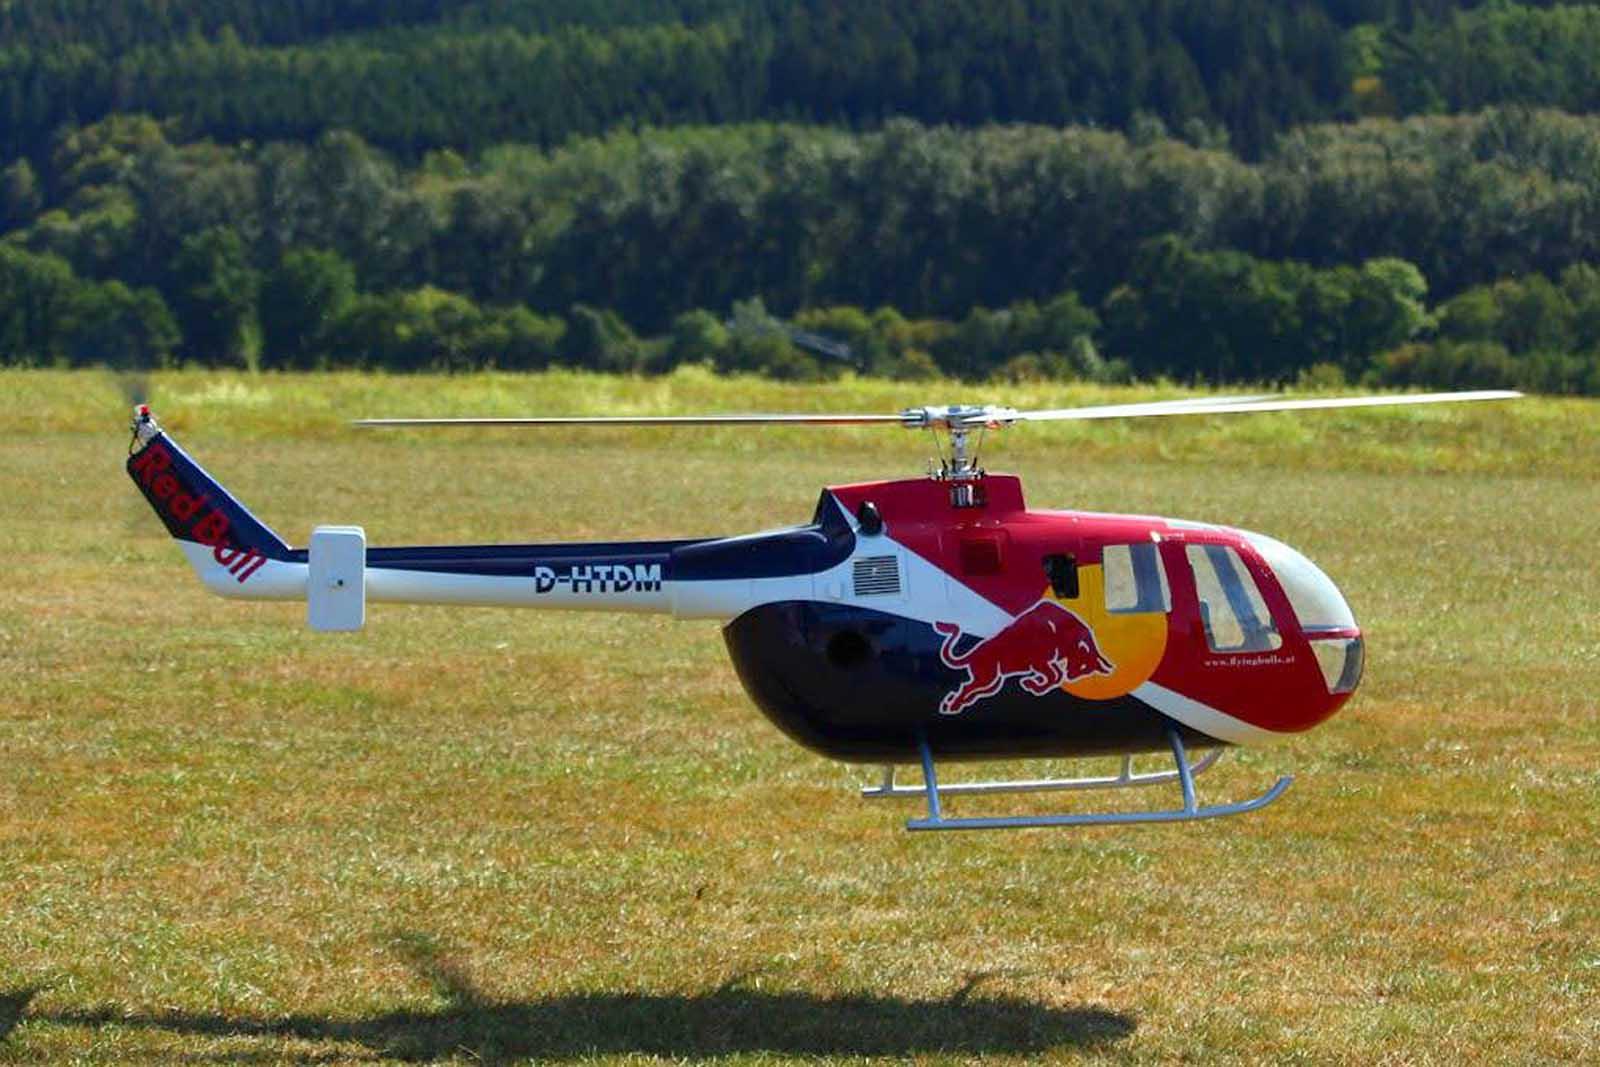 Bo 105 Helicopter Rc: Expert Tips for Flying the bo 105 RC Helicopter